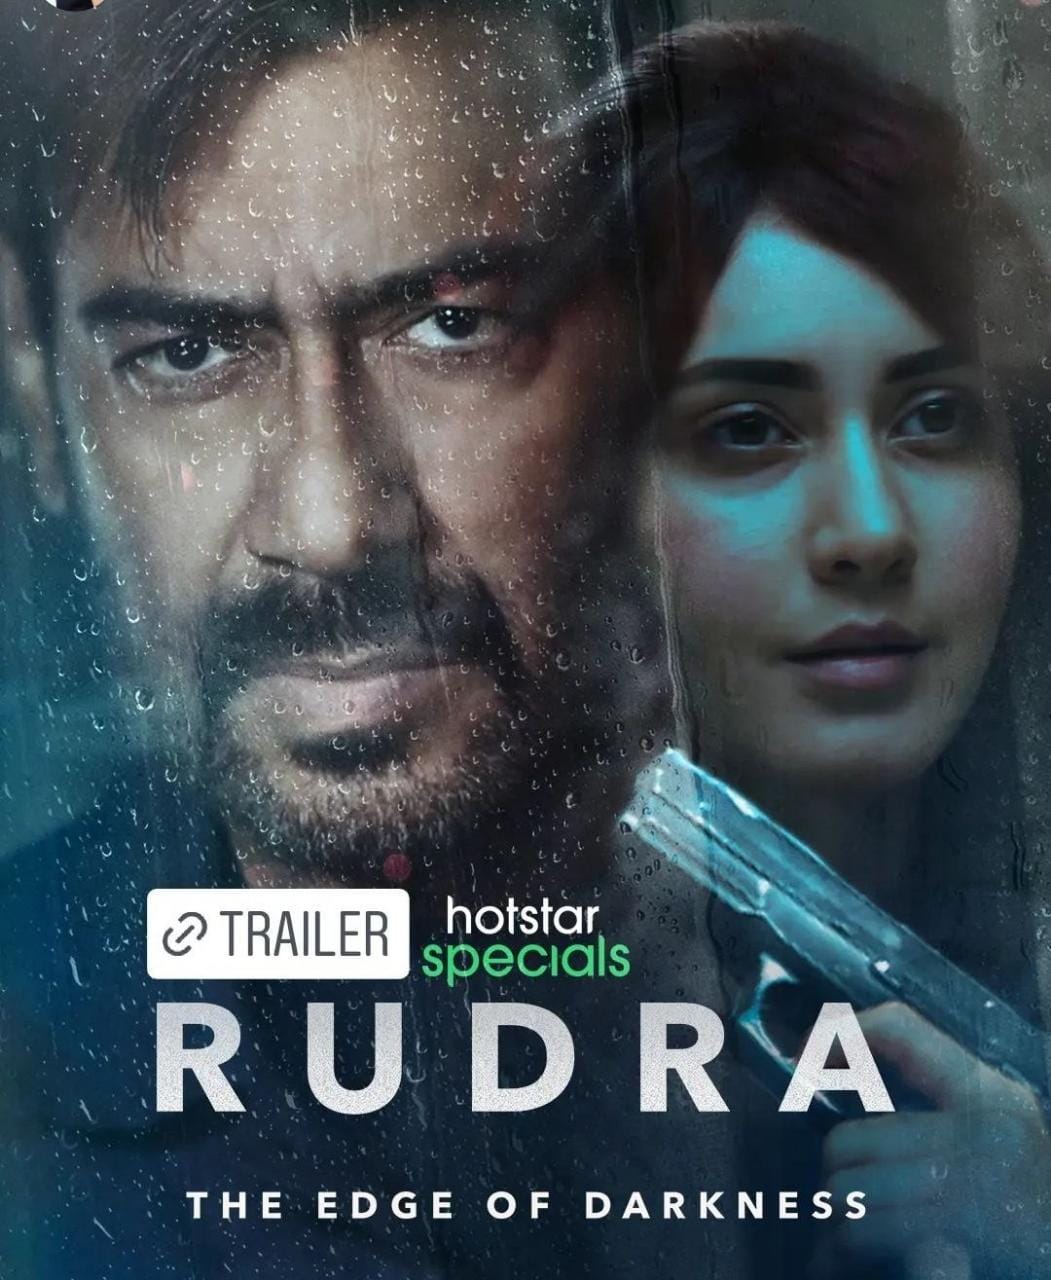 Rudra The Edge of Darkness S1 (2022) Hindi Completed Web Series HEVC ESub